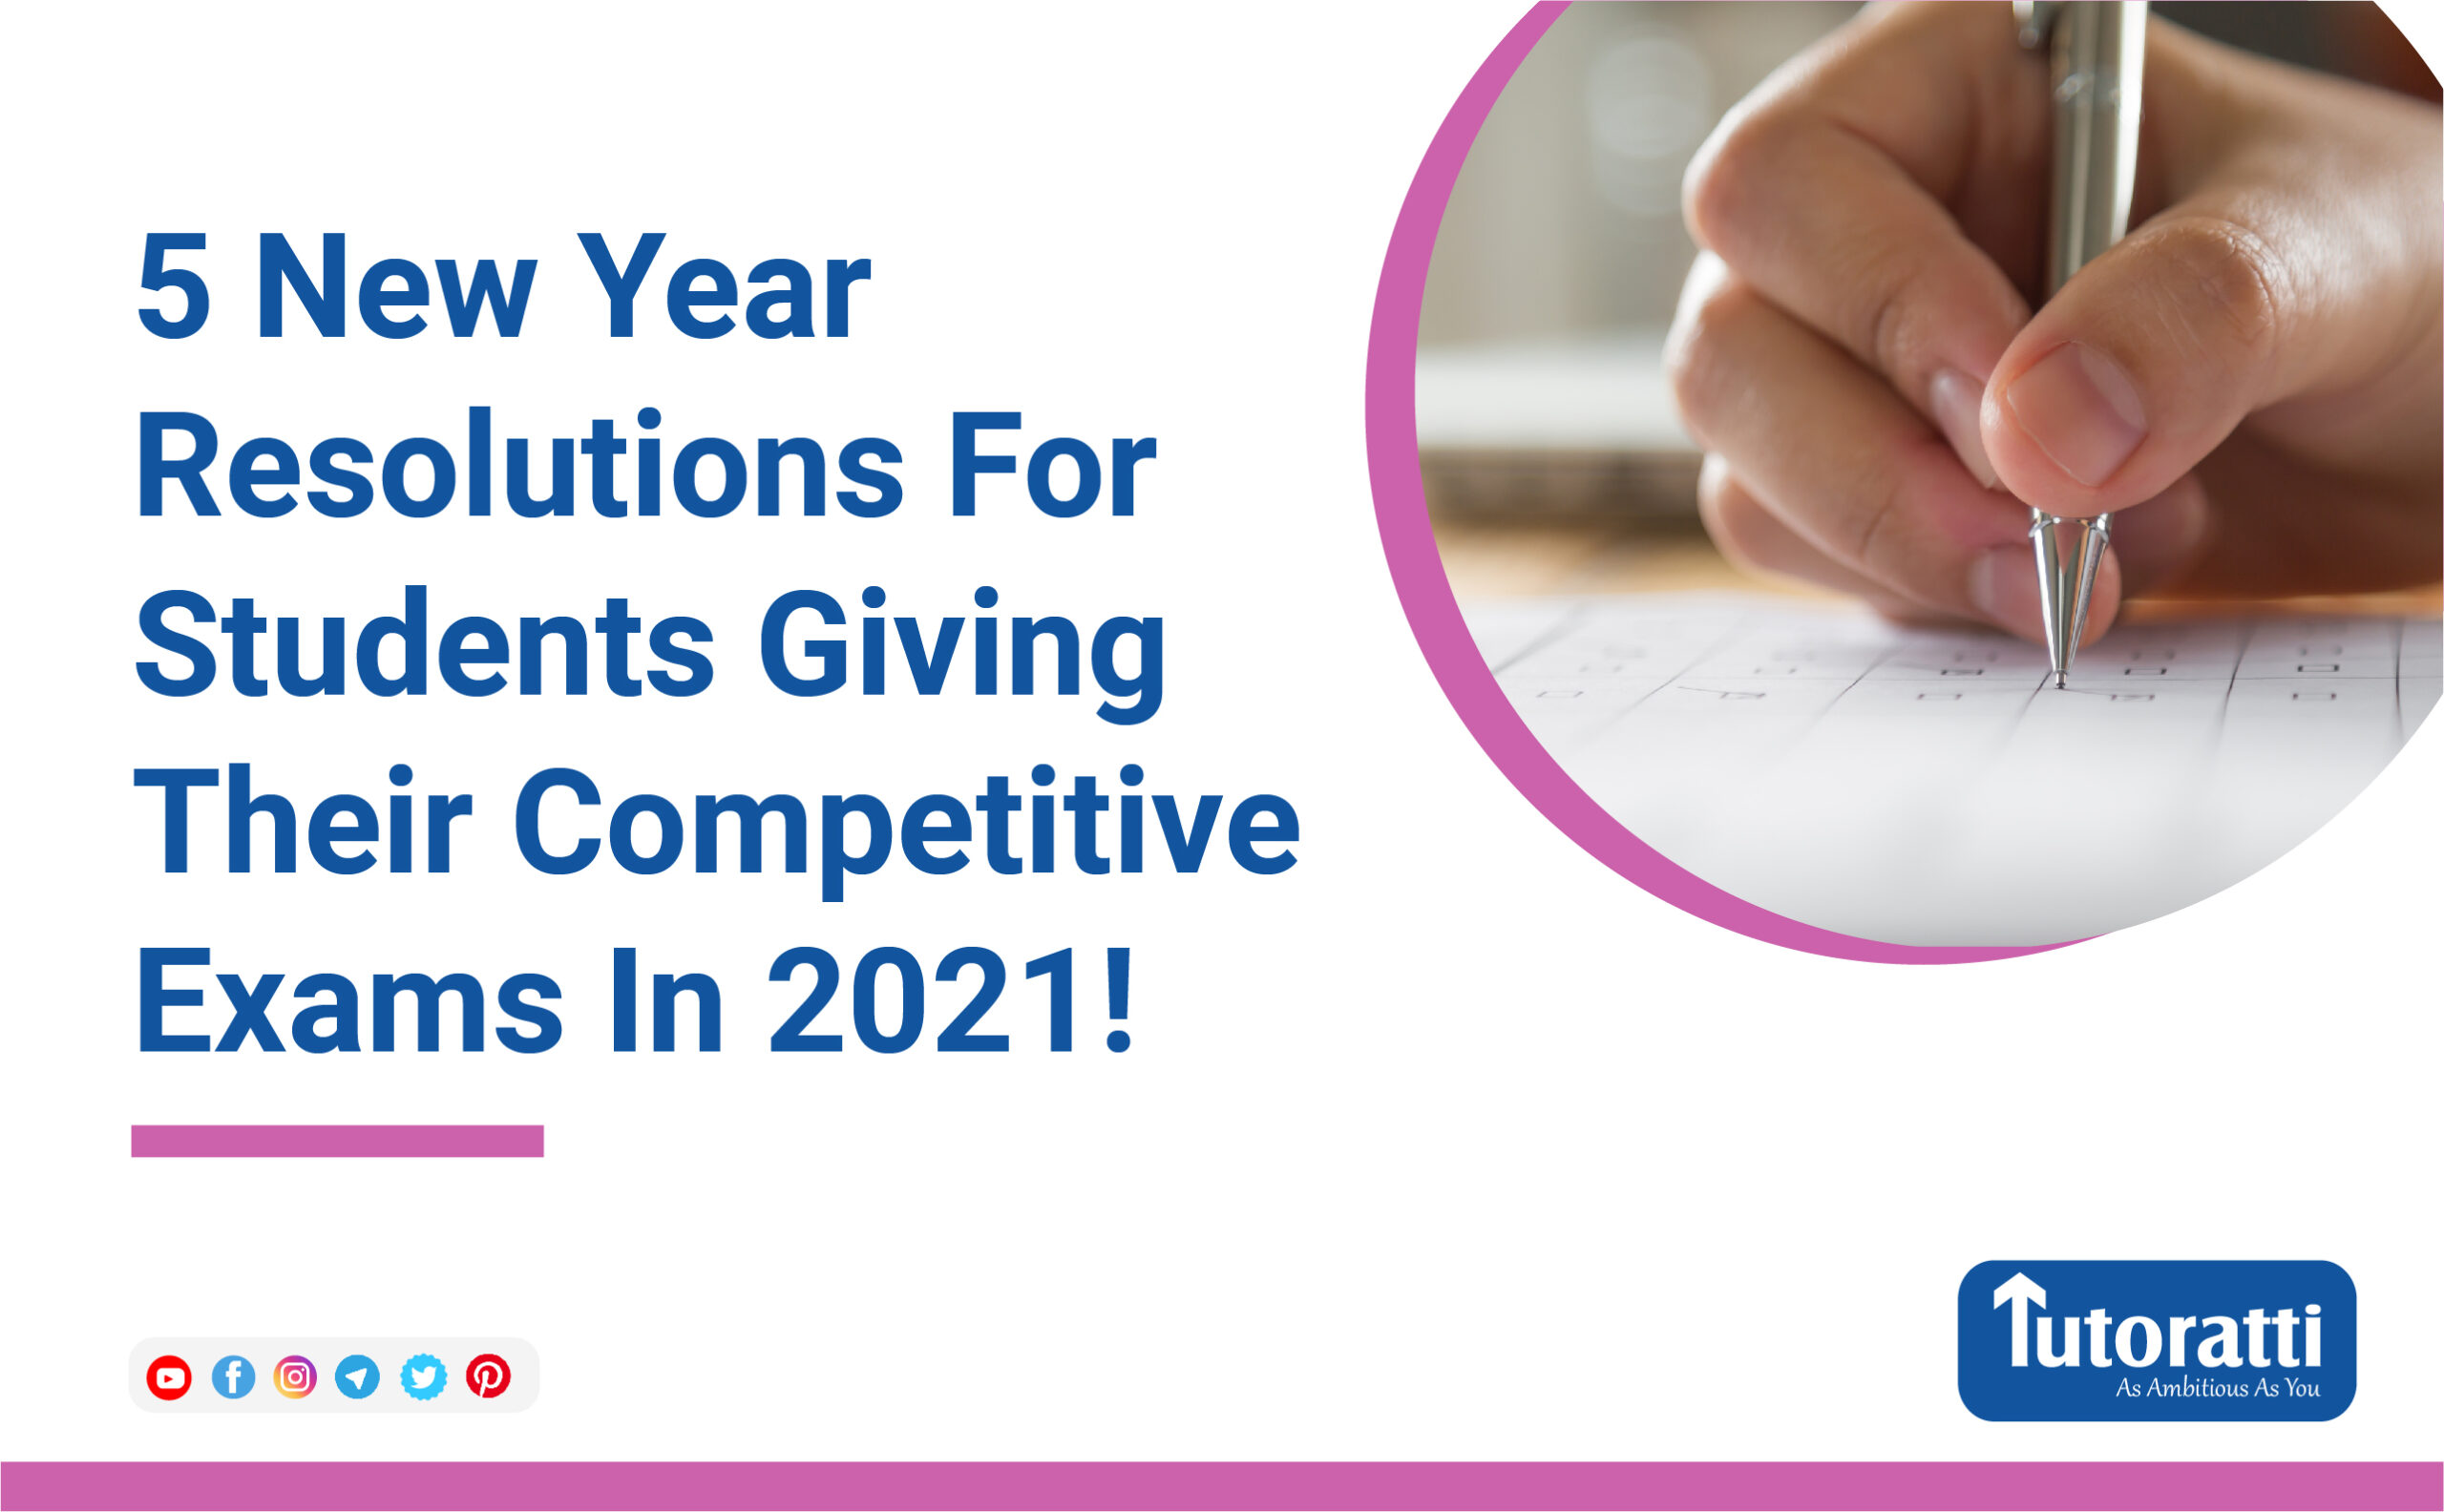 5 New Year Resolutions For Students Giving Their Competitive Exams In 2021!